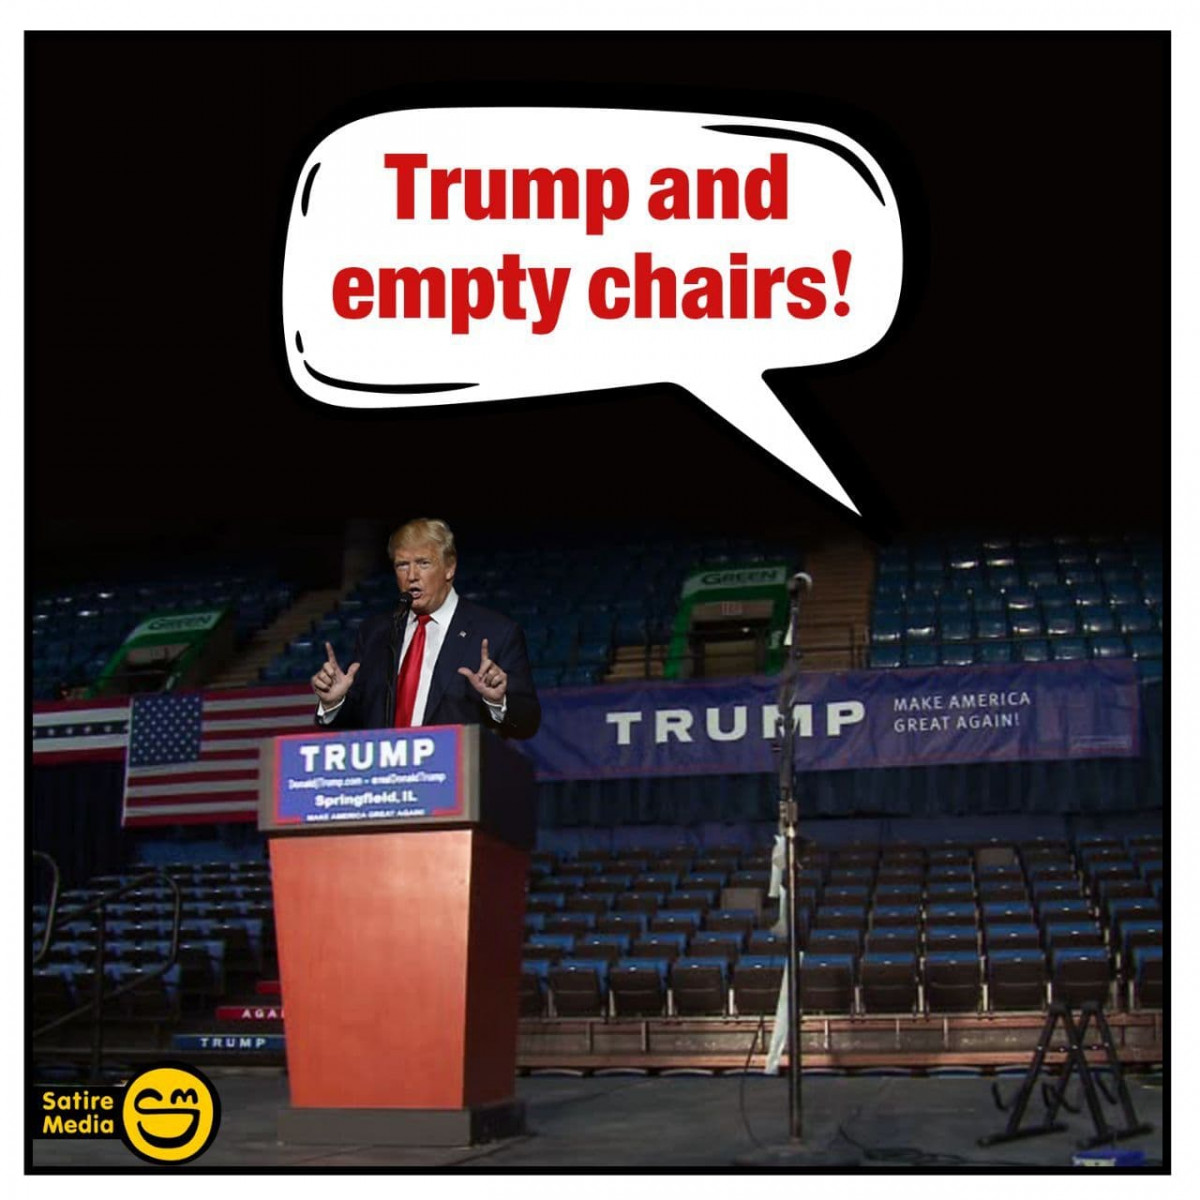 Trump and empty chairs